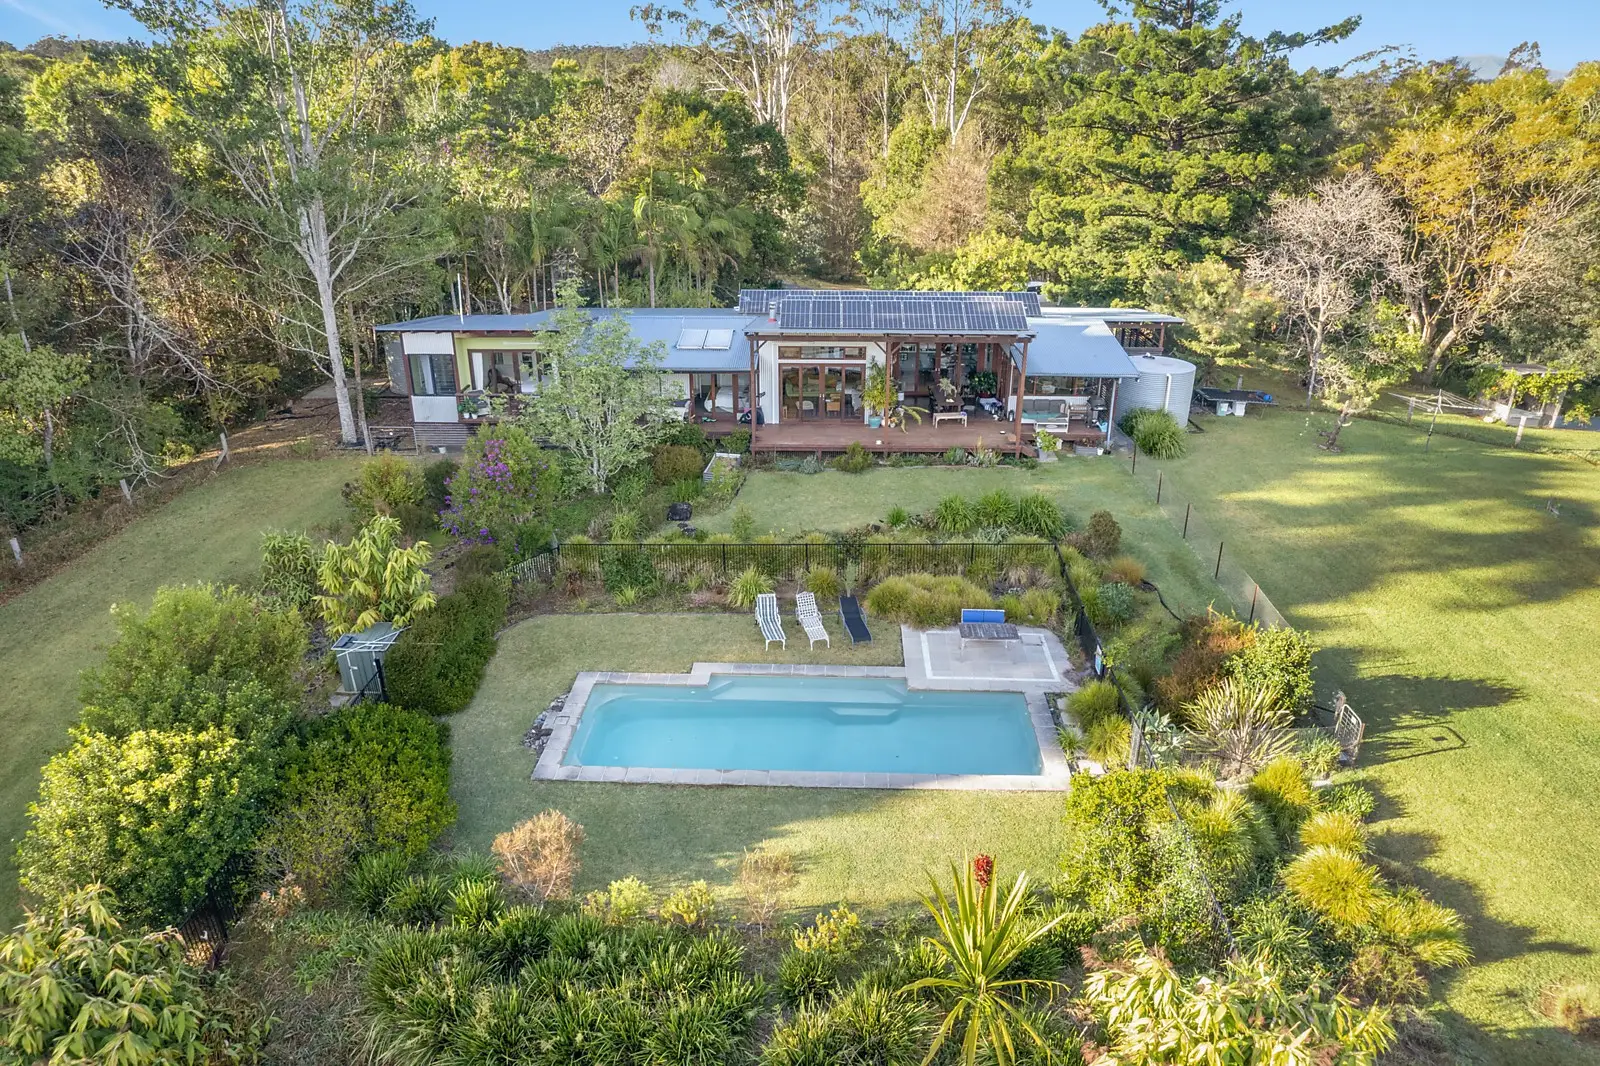 Photo #1: 1090 Promised Land Road, Bellingen - Sold by Sydney Sotheby's International Realty